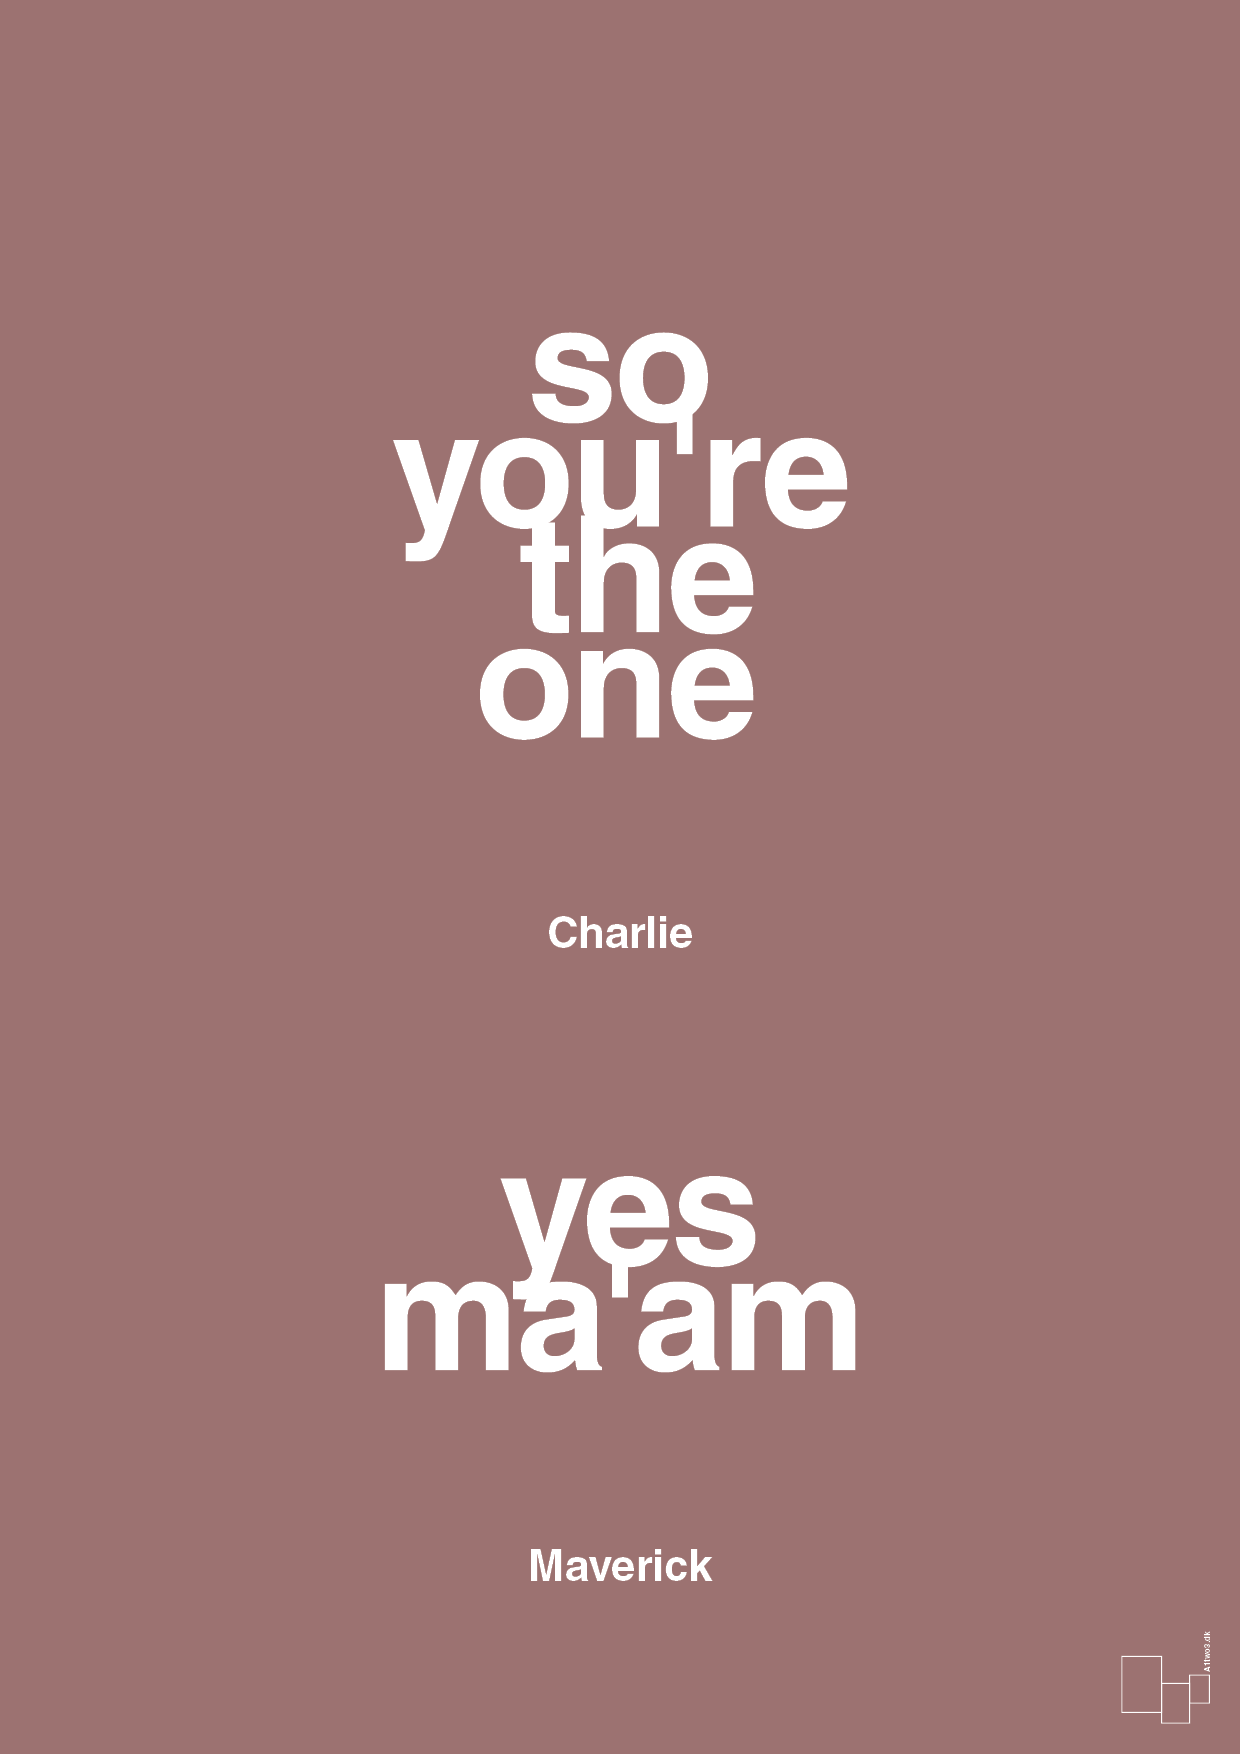 so you're the one - yes ma'am - Plakat med Citater i Plum